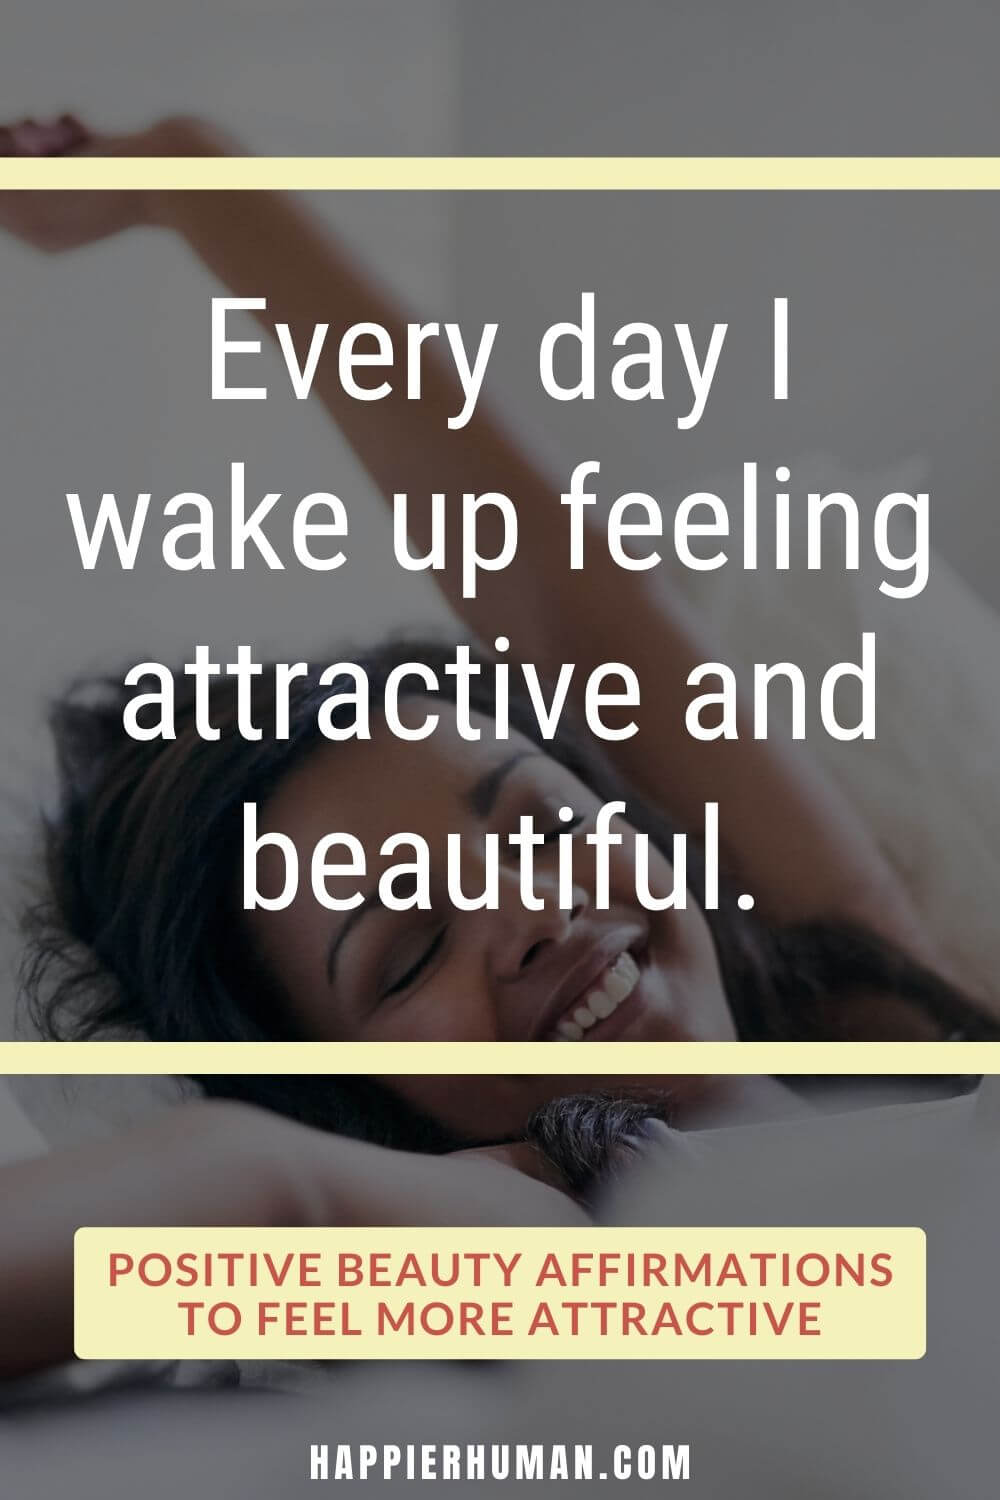 Beauty Affirmations - Every day I wake up feeling attractive and beautiful. | beauty affirmations law of attraction | beauty affirmations list | self-love and beauty affirmations